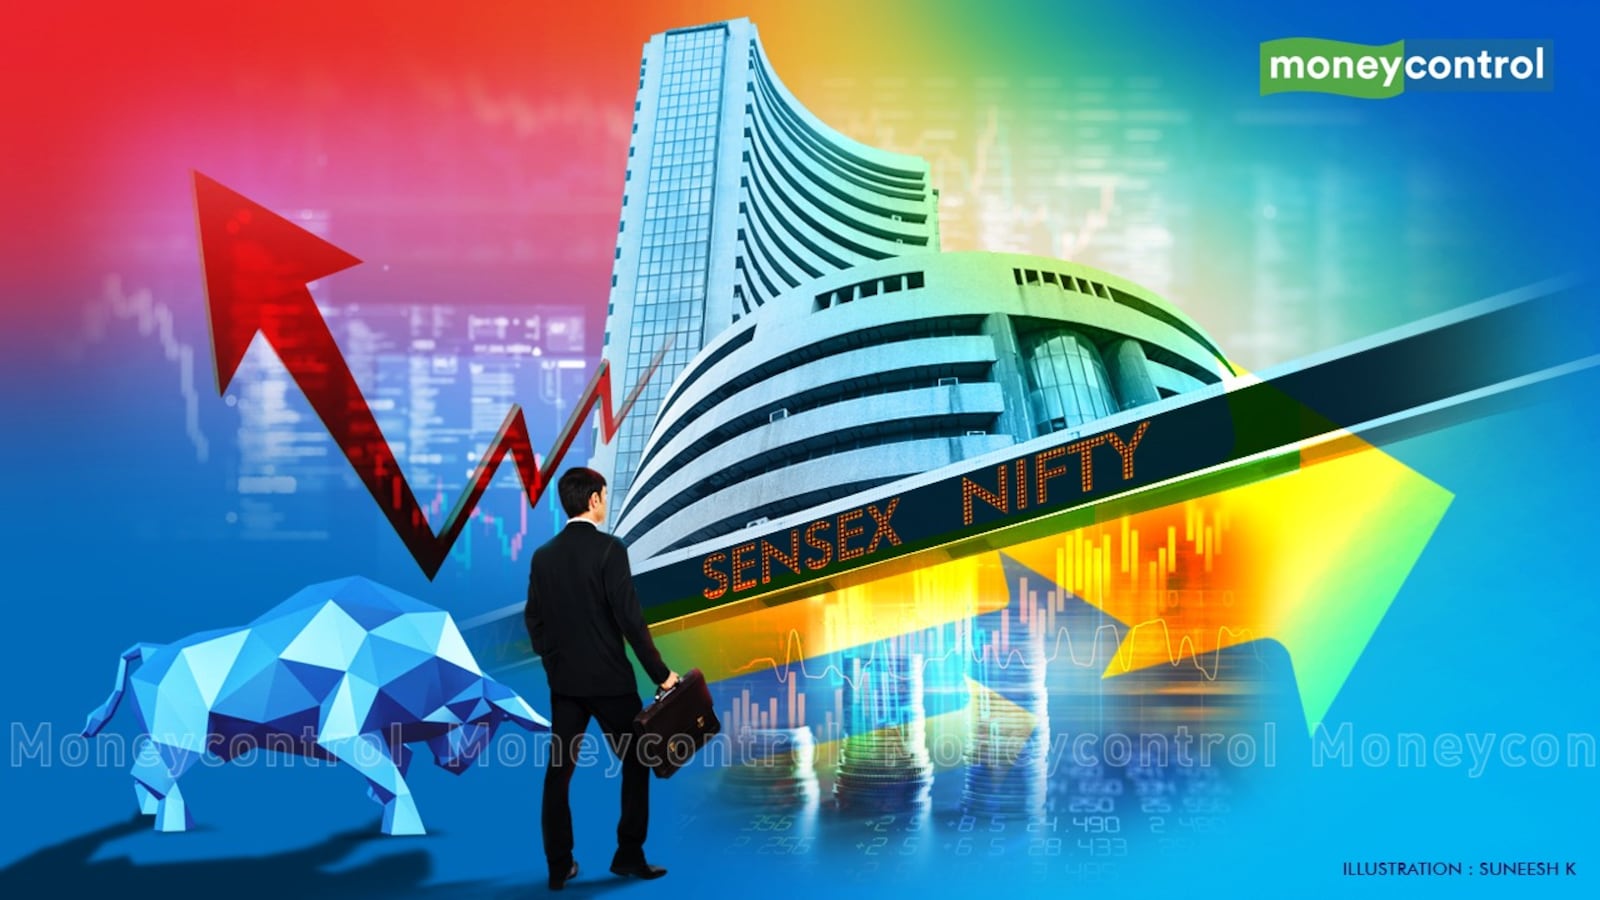 Buzzing Stocks: Tata Elxsi, L&T Finance, Axis Bank, Pidilite, JSW Energy,  others in news